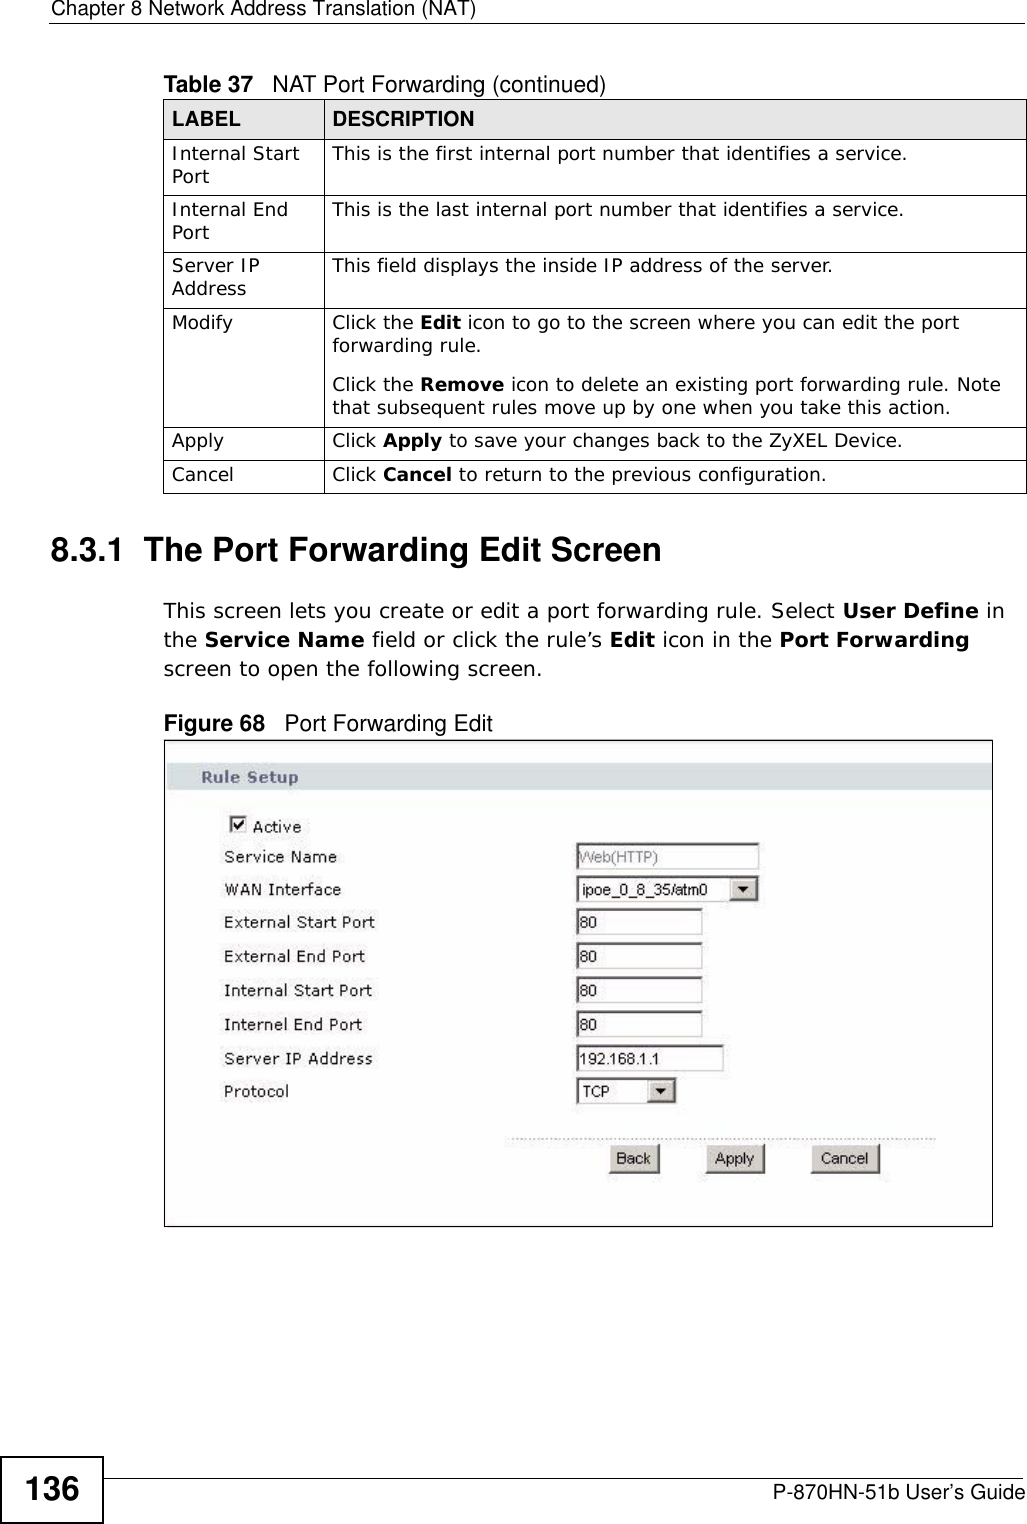 Chapter 8 Network Address Translation (NAT)P-870HN-51b User’s Guide1368.3.1  The Port Forwarding Edit Screen This screen lets you create or edit a port forwarding rule. Select User Define in the Service Name field or click the rule’s Edit icon in the Port Forwarding screen to open the following screen.Figure 68   Port Forwarding Edit Internal Start Port  This is the first internal port number that identifies a service.Internal End Port  This is the last internal port number that identifies a service.Server IP Address This field displays the inside IP address of the server.Modify Click the Edit icon to go to the screen where you can edit the port forwarding rule.Click the Remove icon to delete an existing port forwarding rule. Note that subsequent rules move up by one when you take this action.Apply Click Apply to save your changes back to the ZyXEL Device.Cancel Click Cancel to return to the previous configuration.Table 37   NAT Port Forwarding (continued)LABEL DESCRIPTION